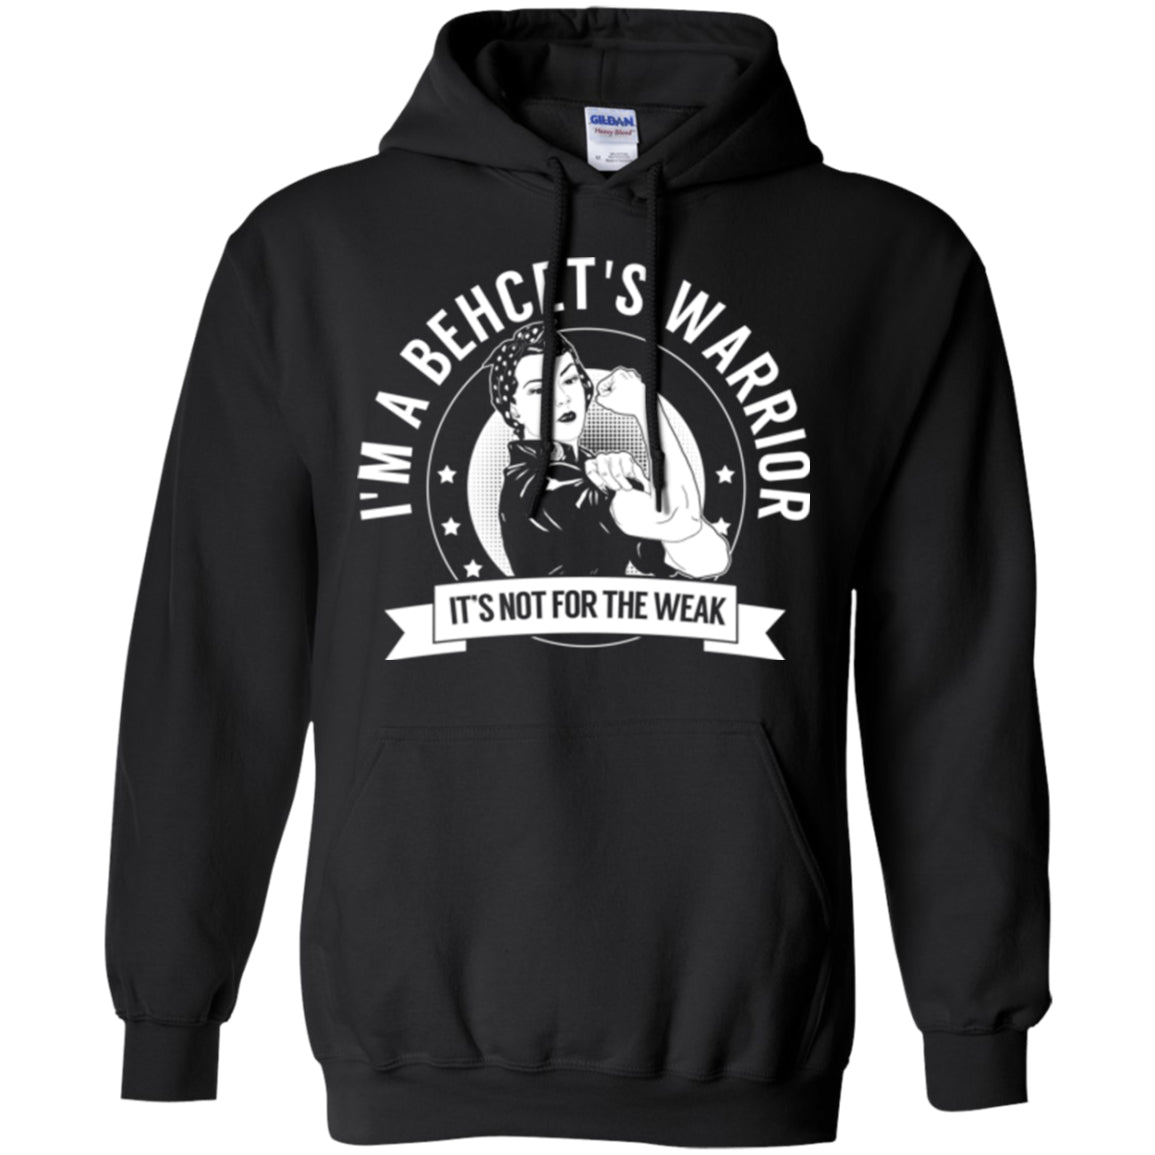 Behcet's Warrior NFTW Pullover Hoodie 8 oz. - The Unchargeables